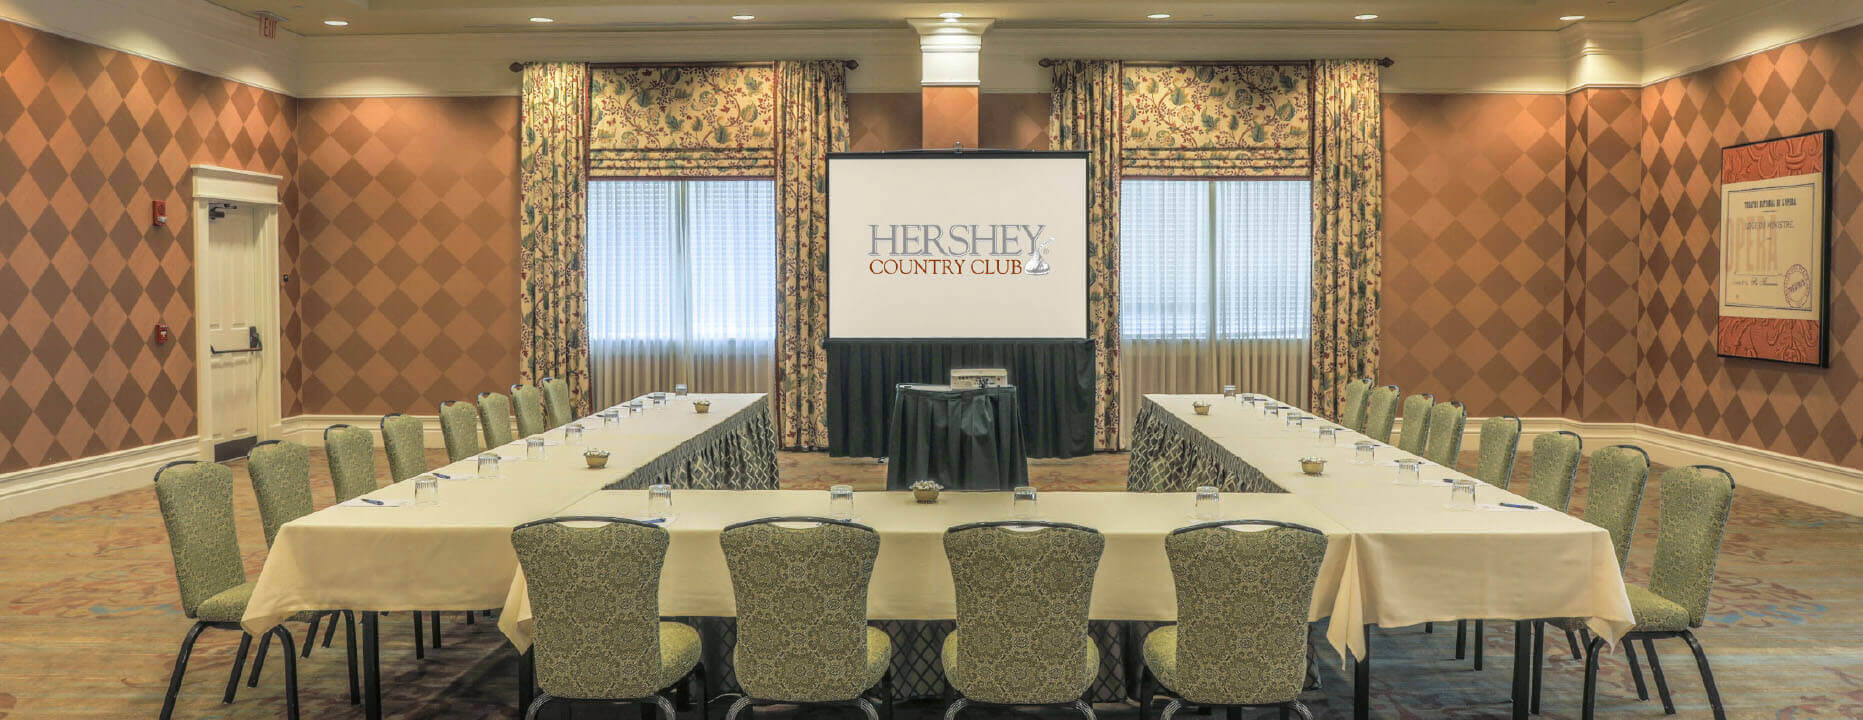 Weitzel Room at Hershey Country Club